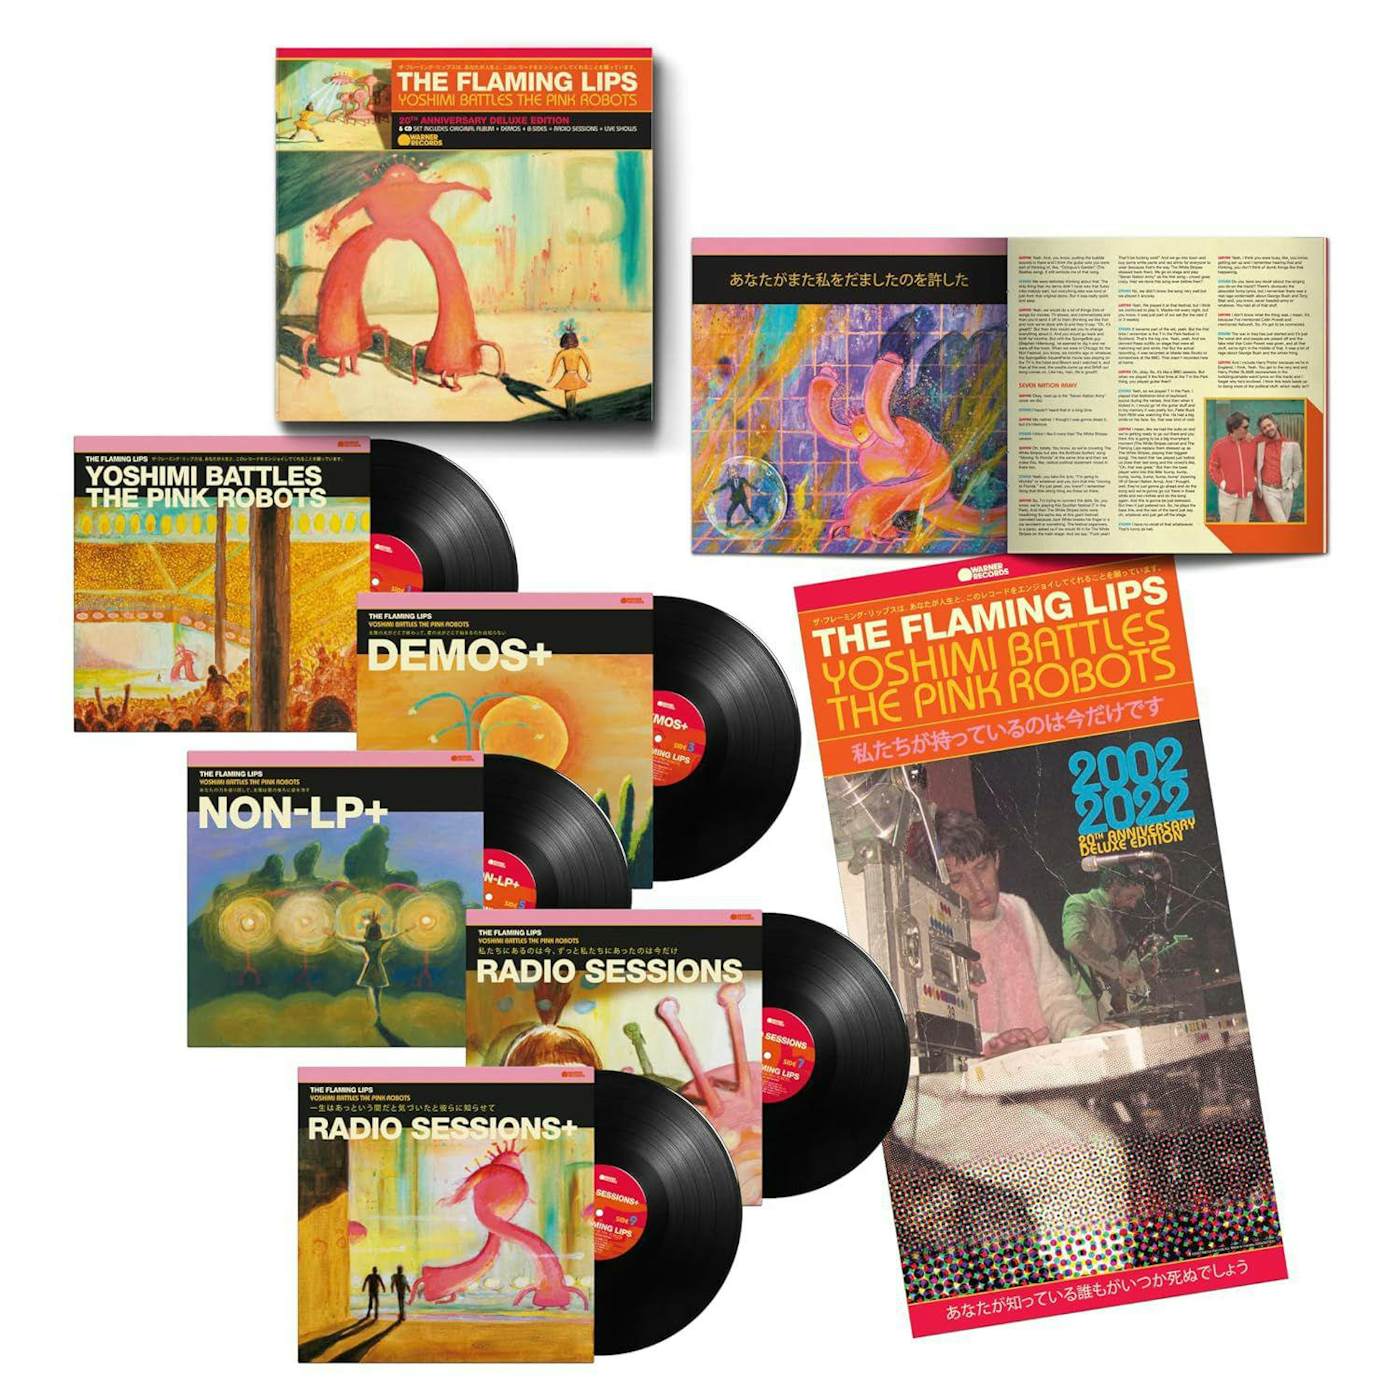 The Flaming Lips Yoshimi Battles the Pink Robots (20th Anniversary Deluxe Edition 5LP) Box Set (Vinyl)